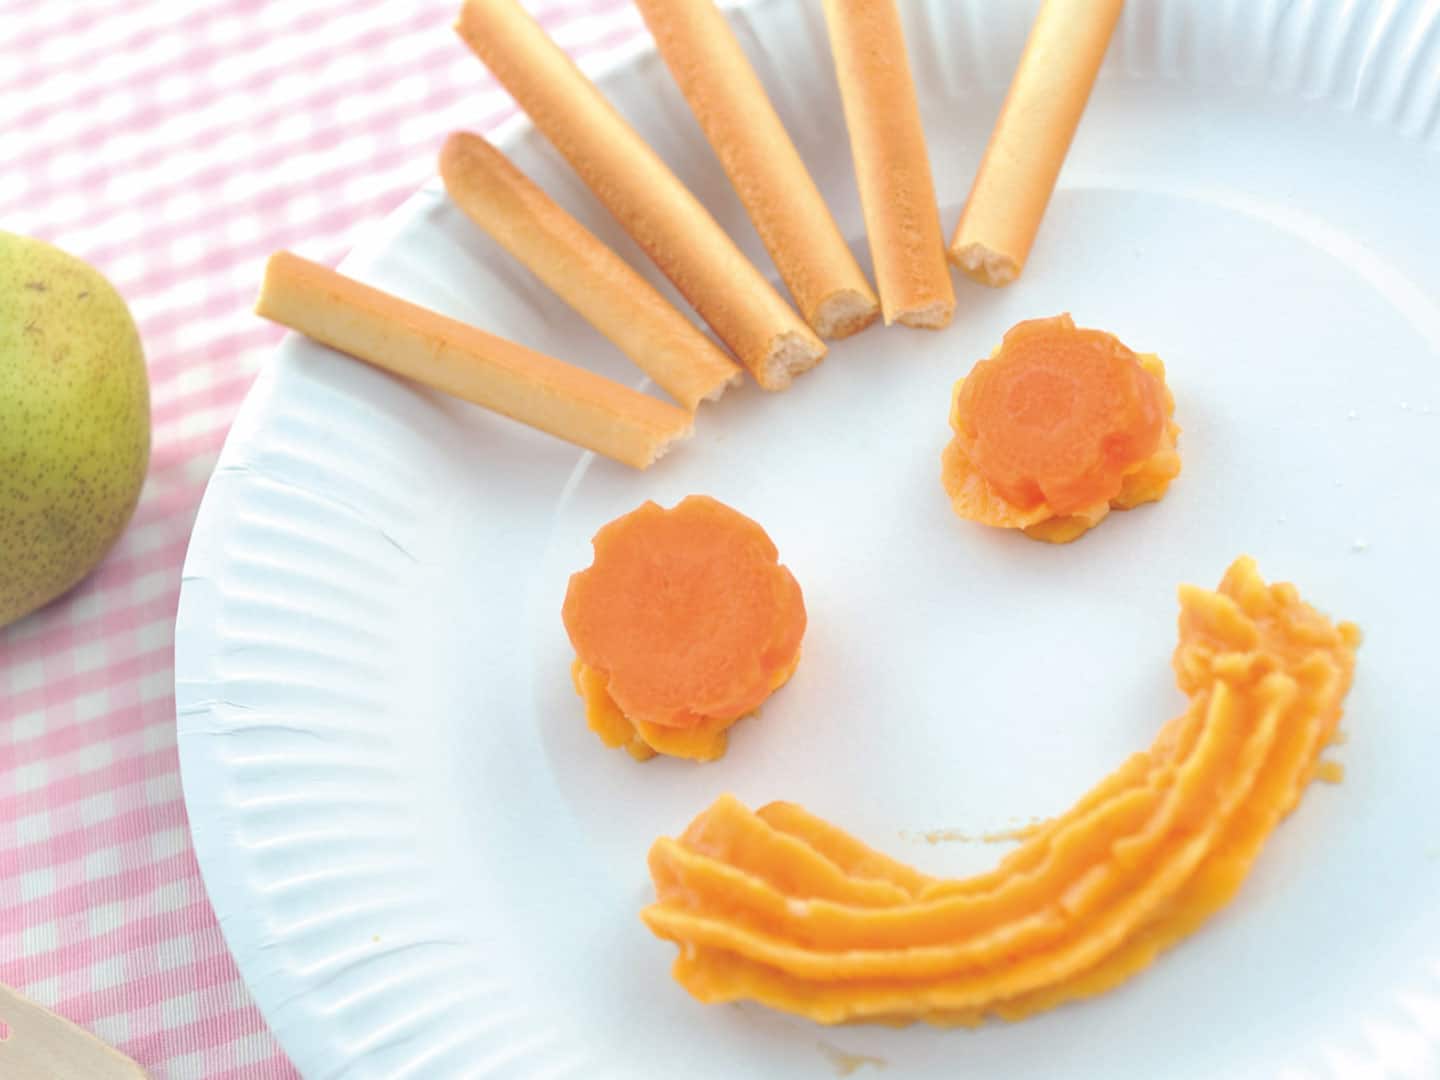 9-12 months: Thick carrot puree shaped like a smiling face